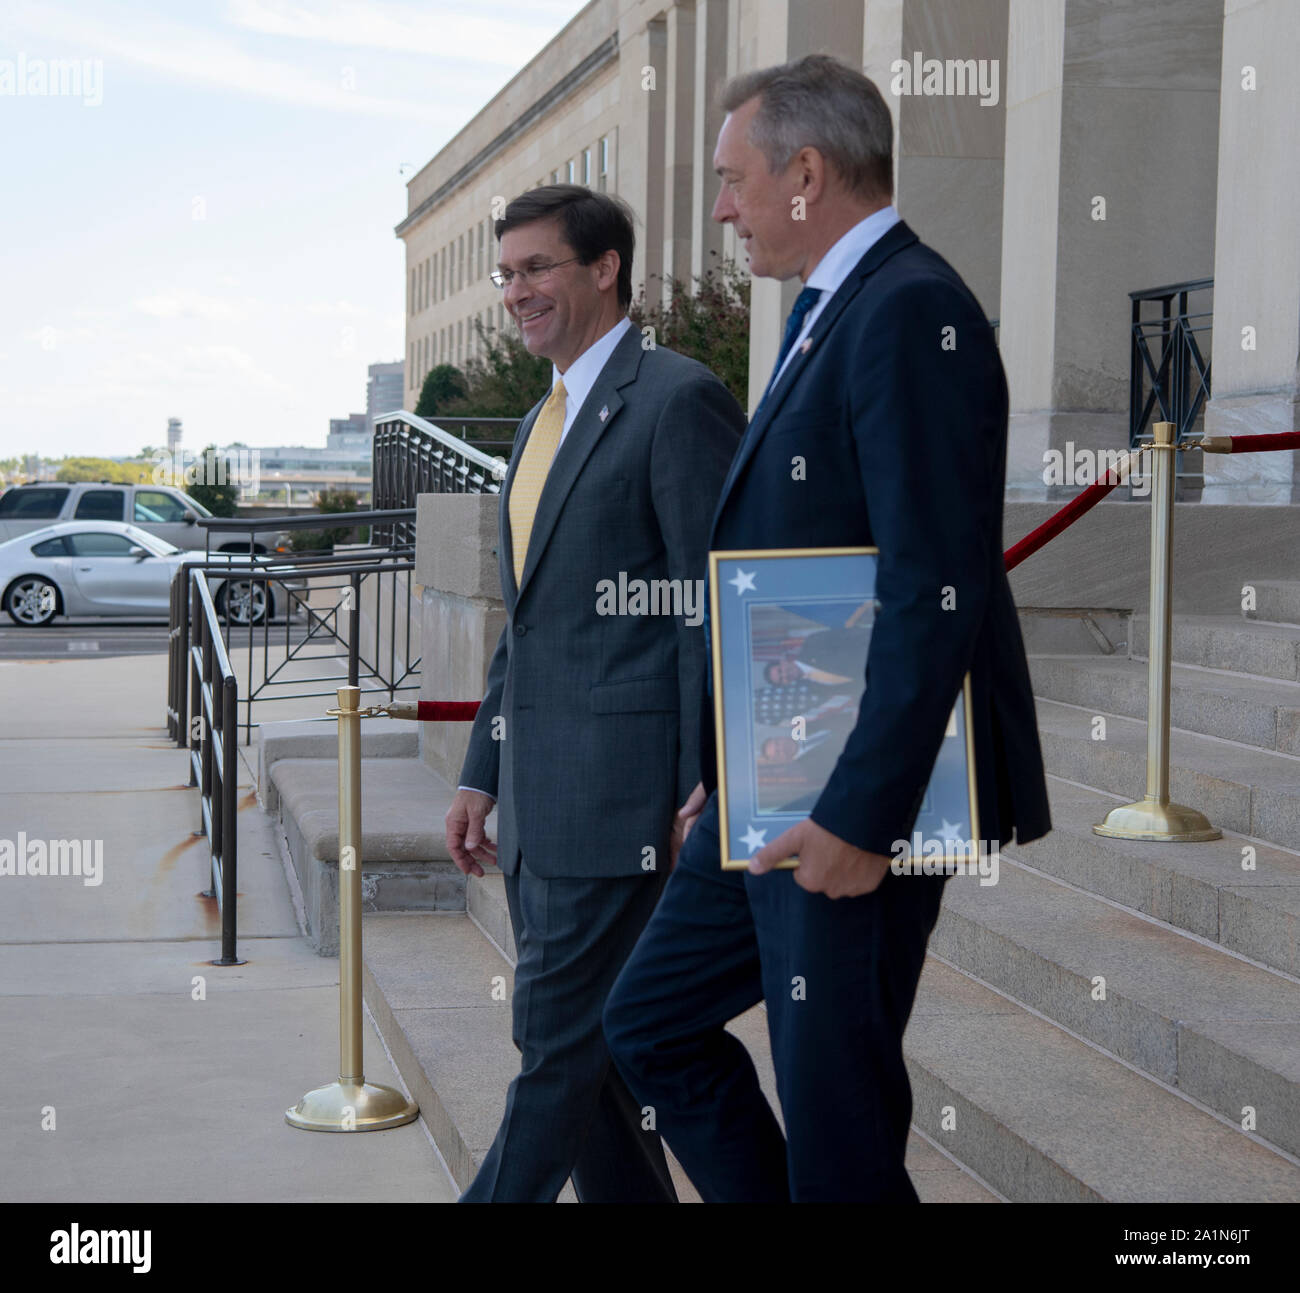 U.S. Secretary of Defense Dr. Mark T. Esper escorts Norwegian Defense Minister Frank Bakke-Jensen to his car after talks at the Pentagon, Sept. 27, 2019. (DoD photo by Army Staff Sgt. Vanessa Atchley) Stock Photo